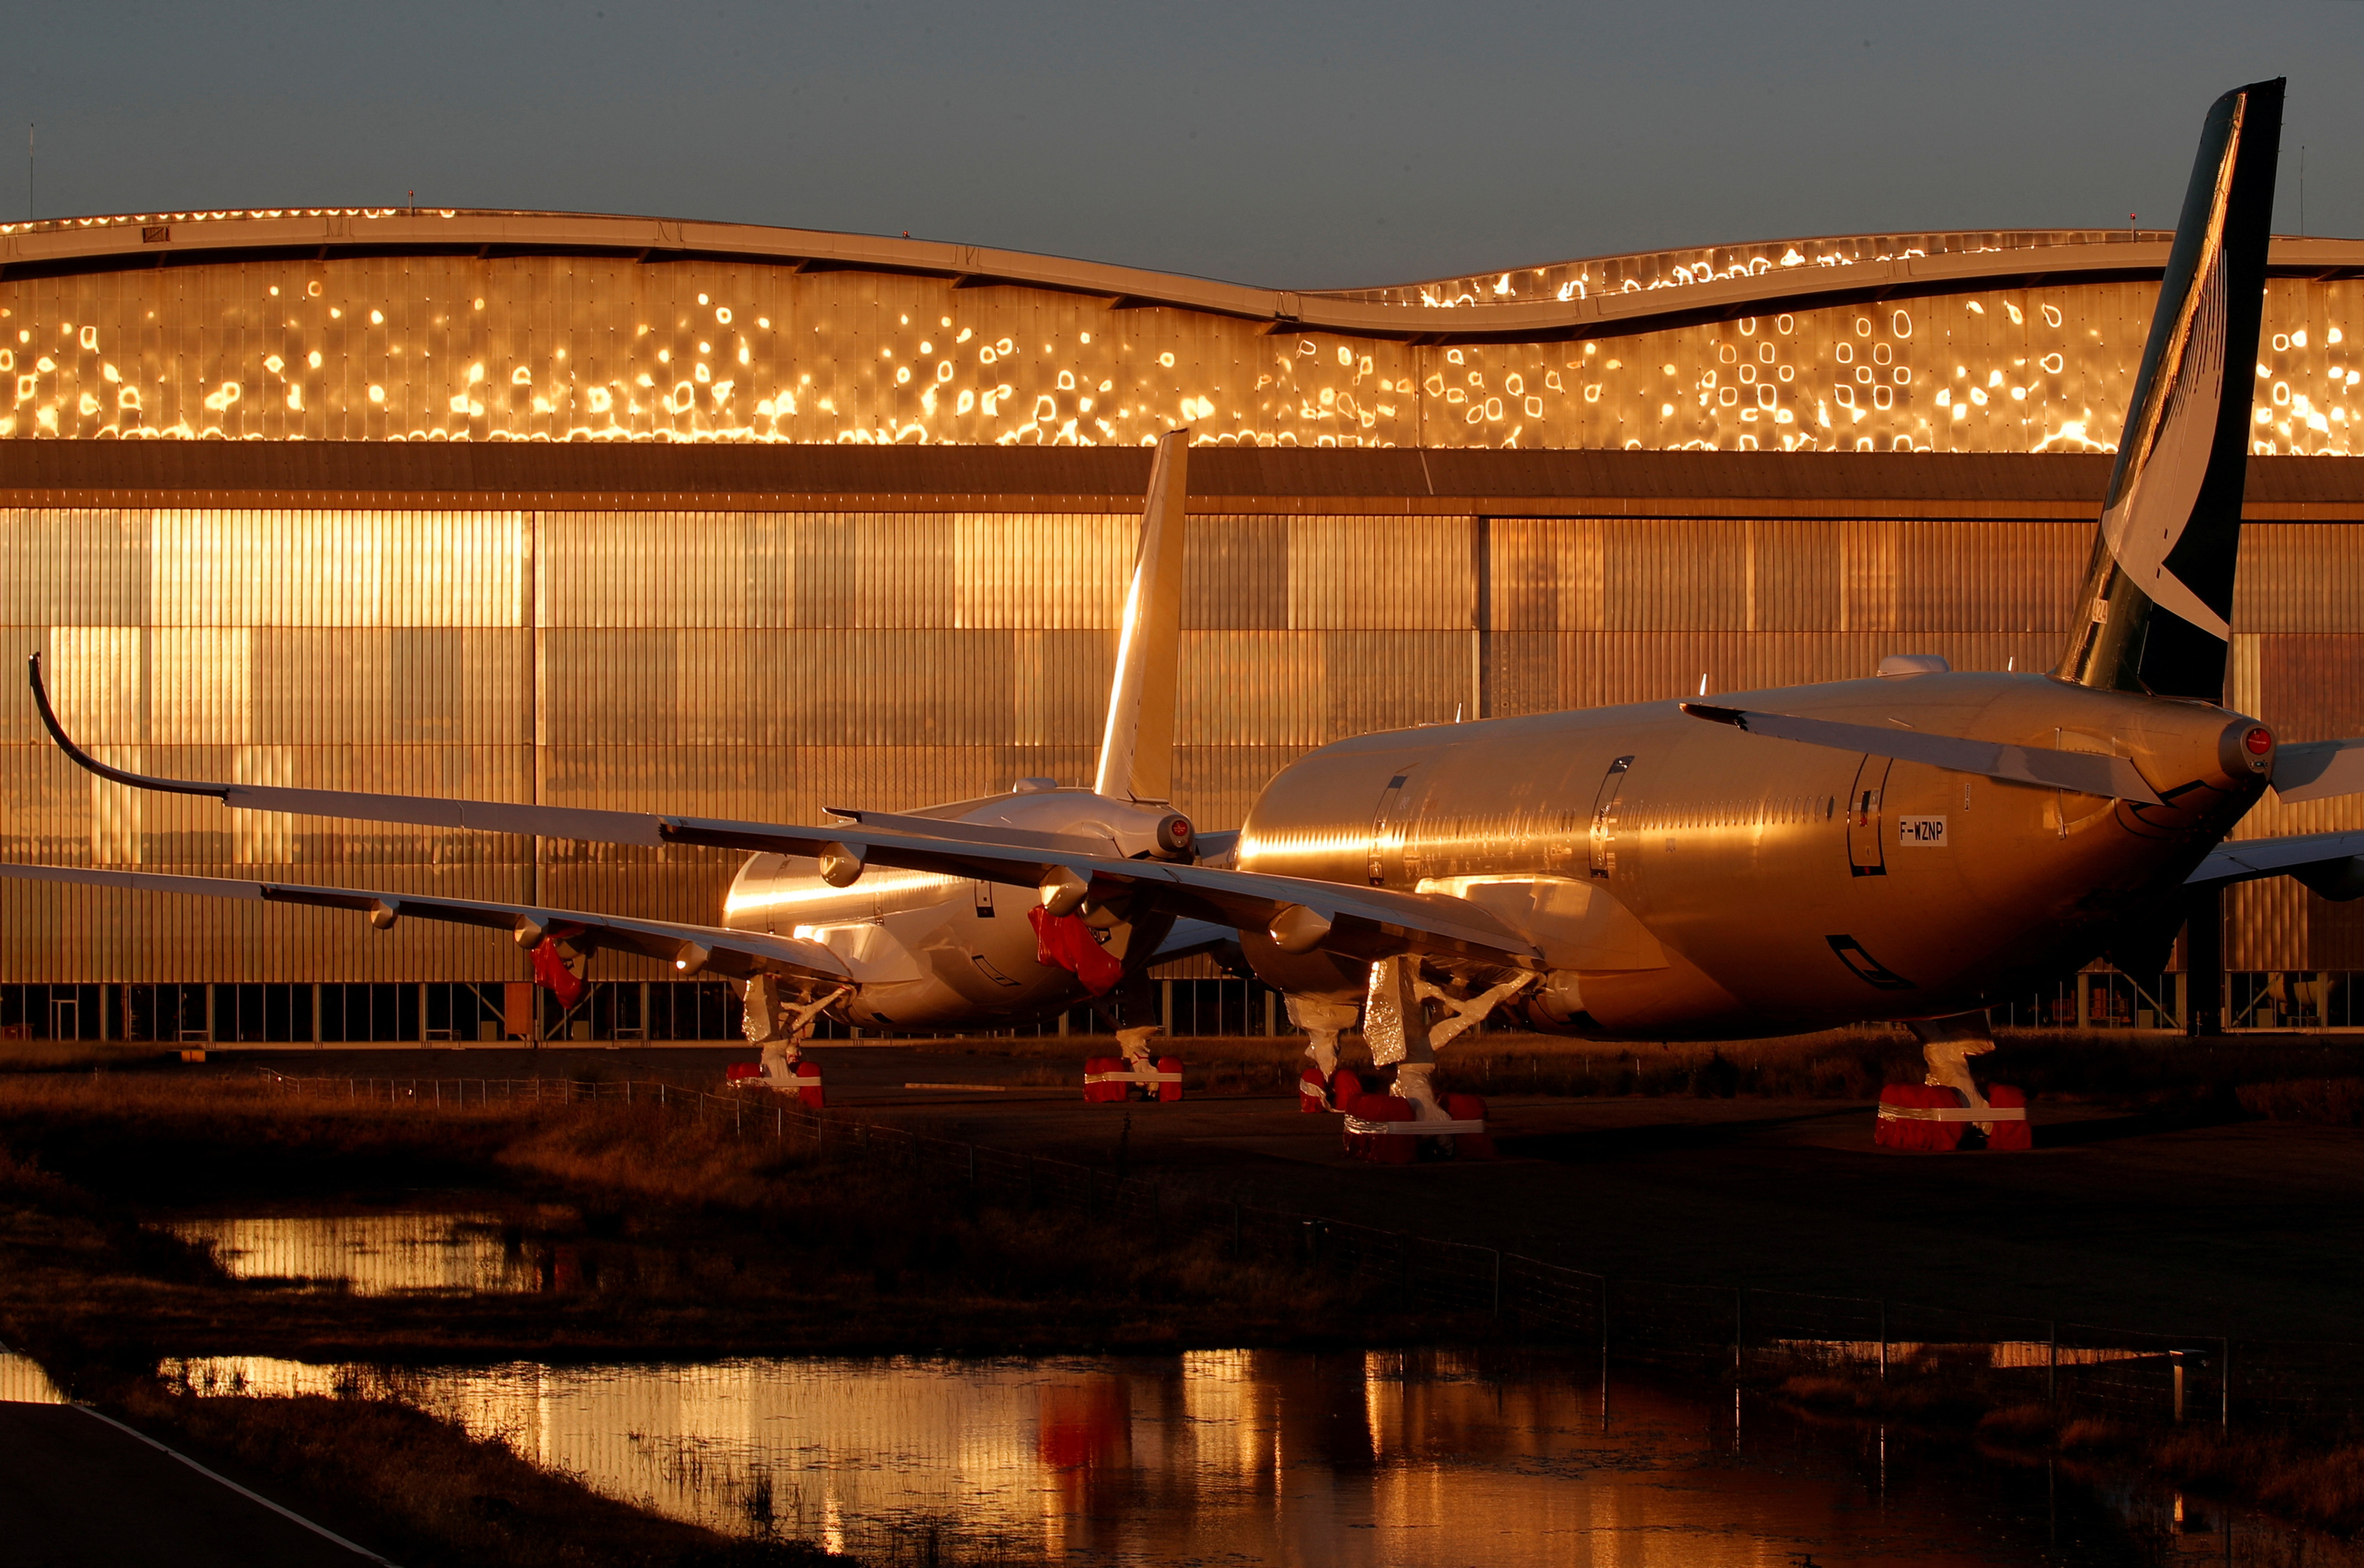 A350 passenger aircraft are seen parked at the Airbus factory in Blagnac near Toulouse